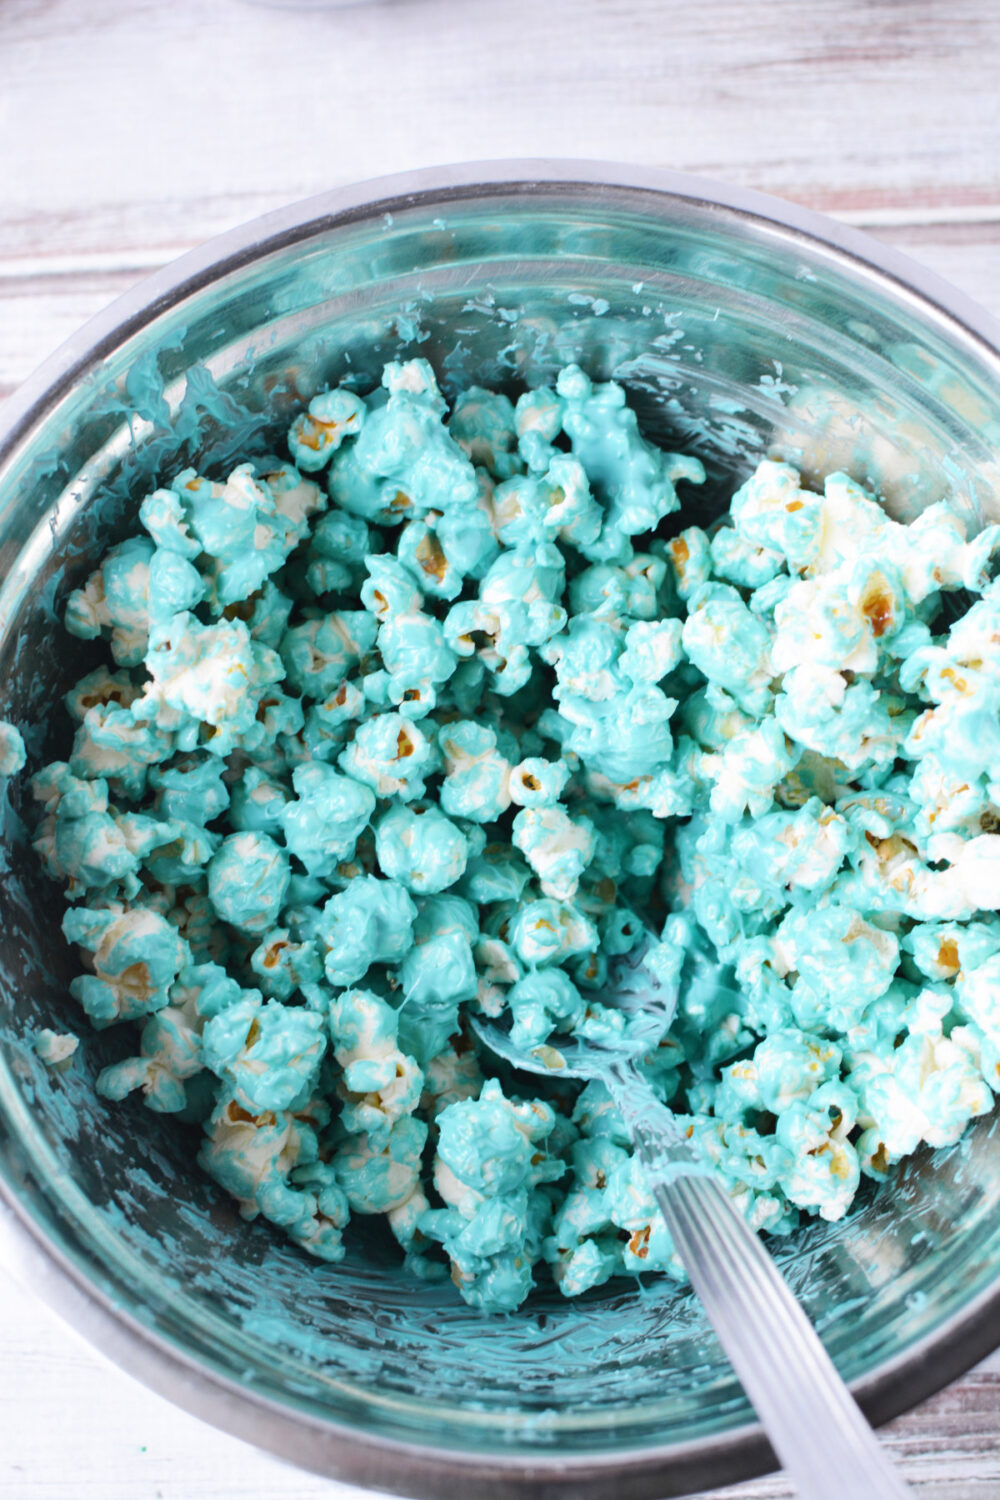 Popcorn coated with blue melted candy.